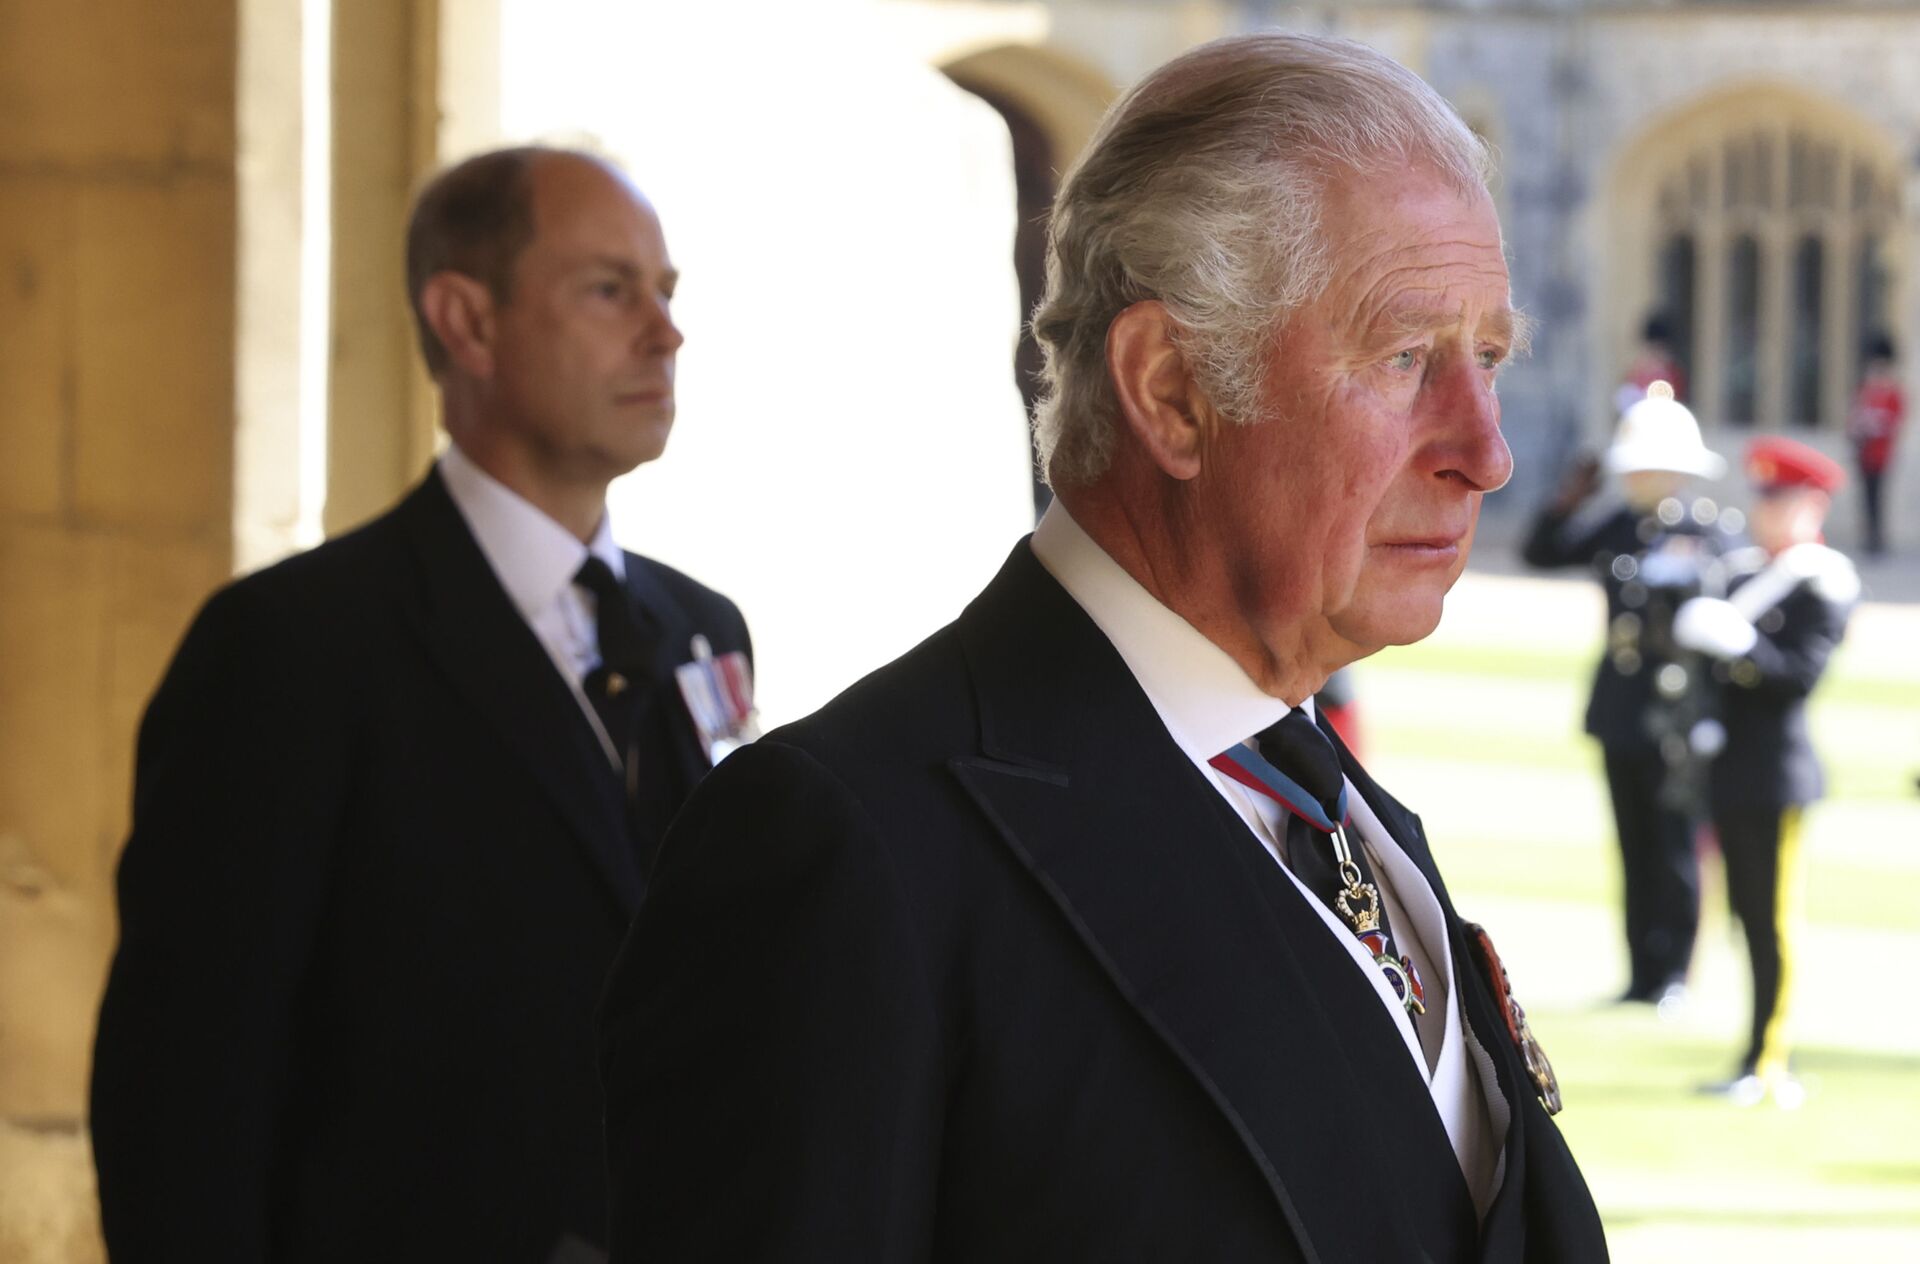 Prince Charles, right, and Prince Edward follow the procession during the funeral of Britain's Prince Philip inside Windsor Castle in Windsor, England, Saturday, April 17, 2021. Prince Philip died April 9 at the age of 99 after 73 years of marriage to Britain's Queen Elizabeth II - Sputnik International, 1920, 23.04.2022